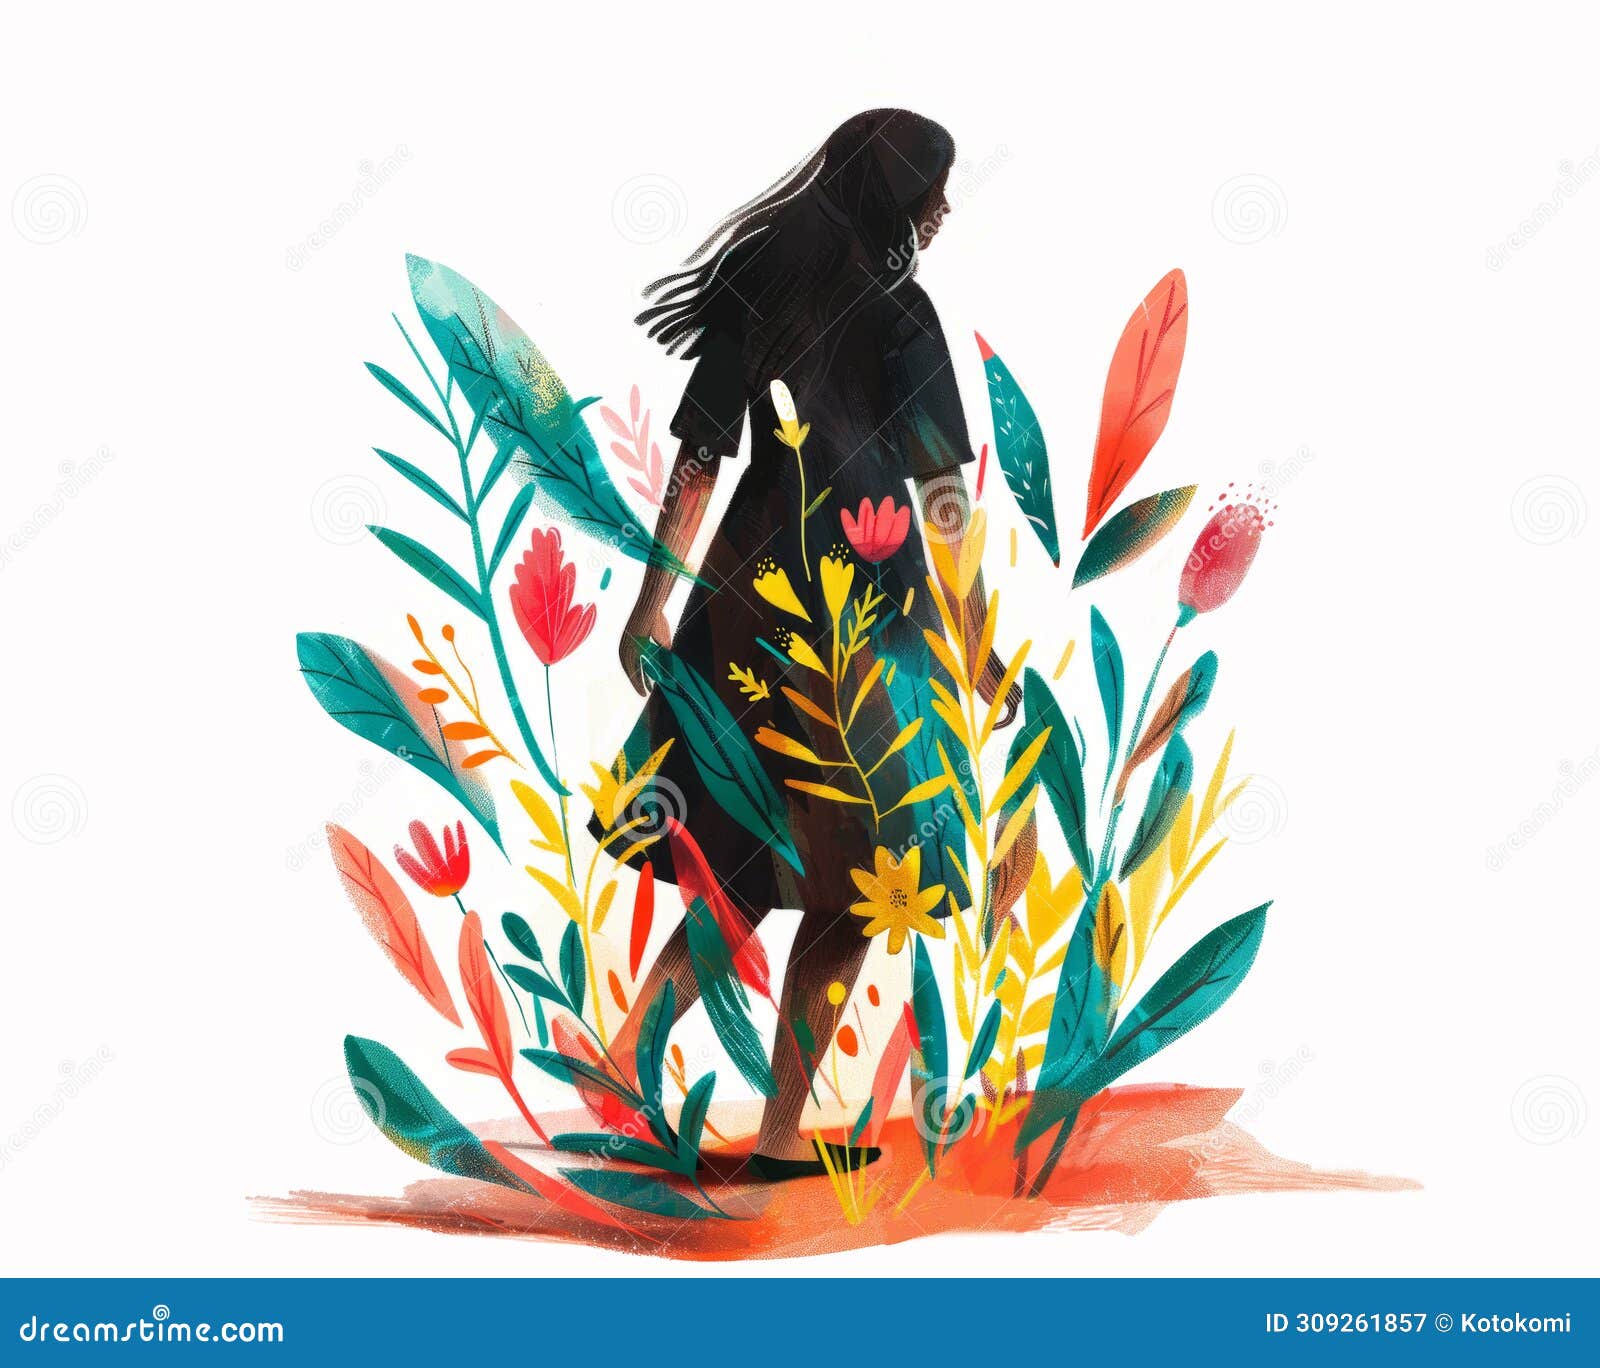 dark woman silhouette lost in flowers and plants. concept  of midlife crisis, distress, self exploring path.